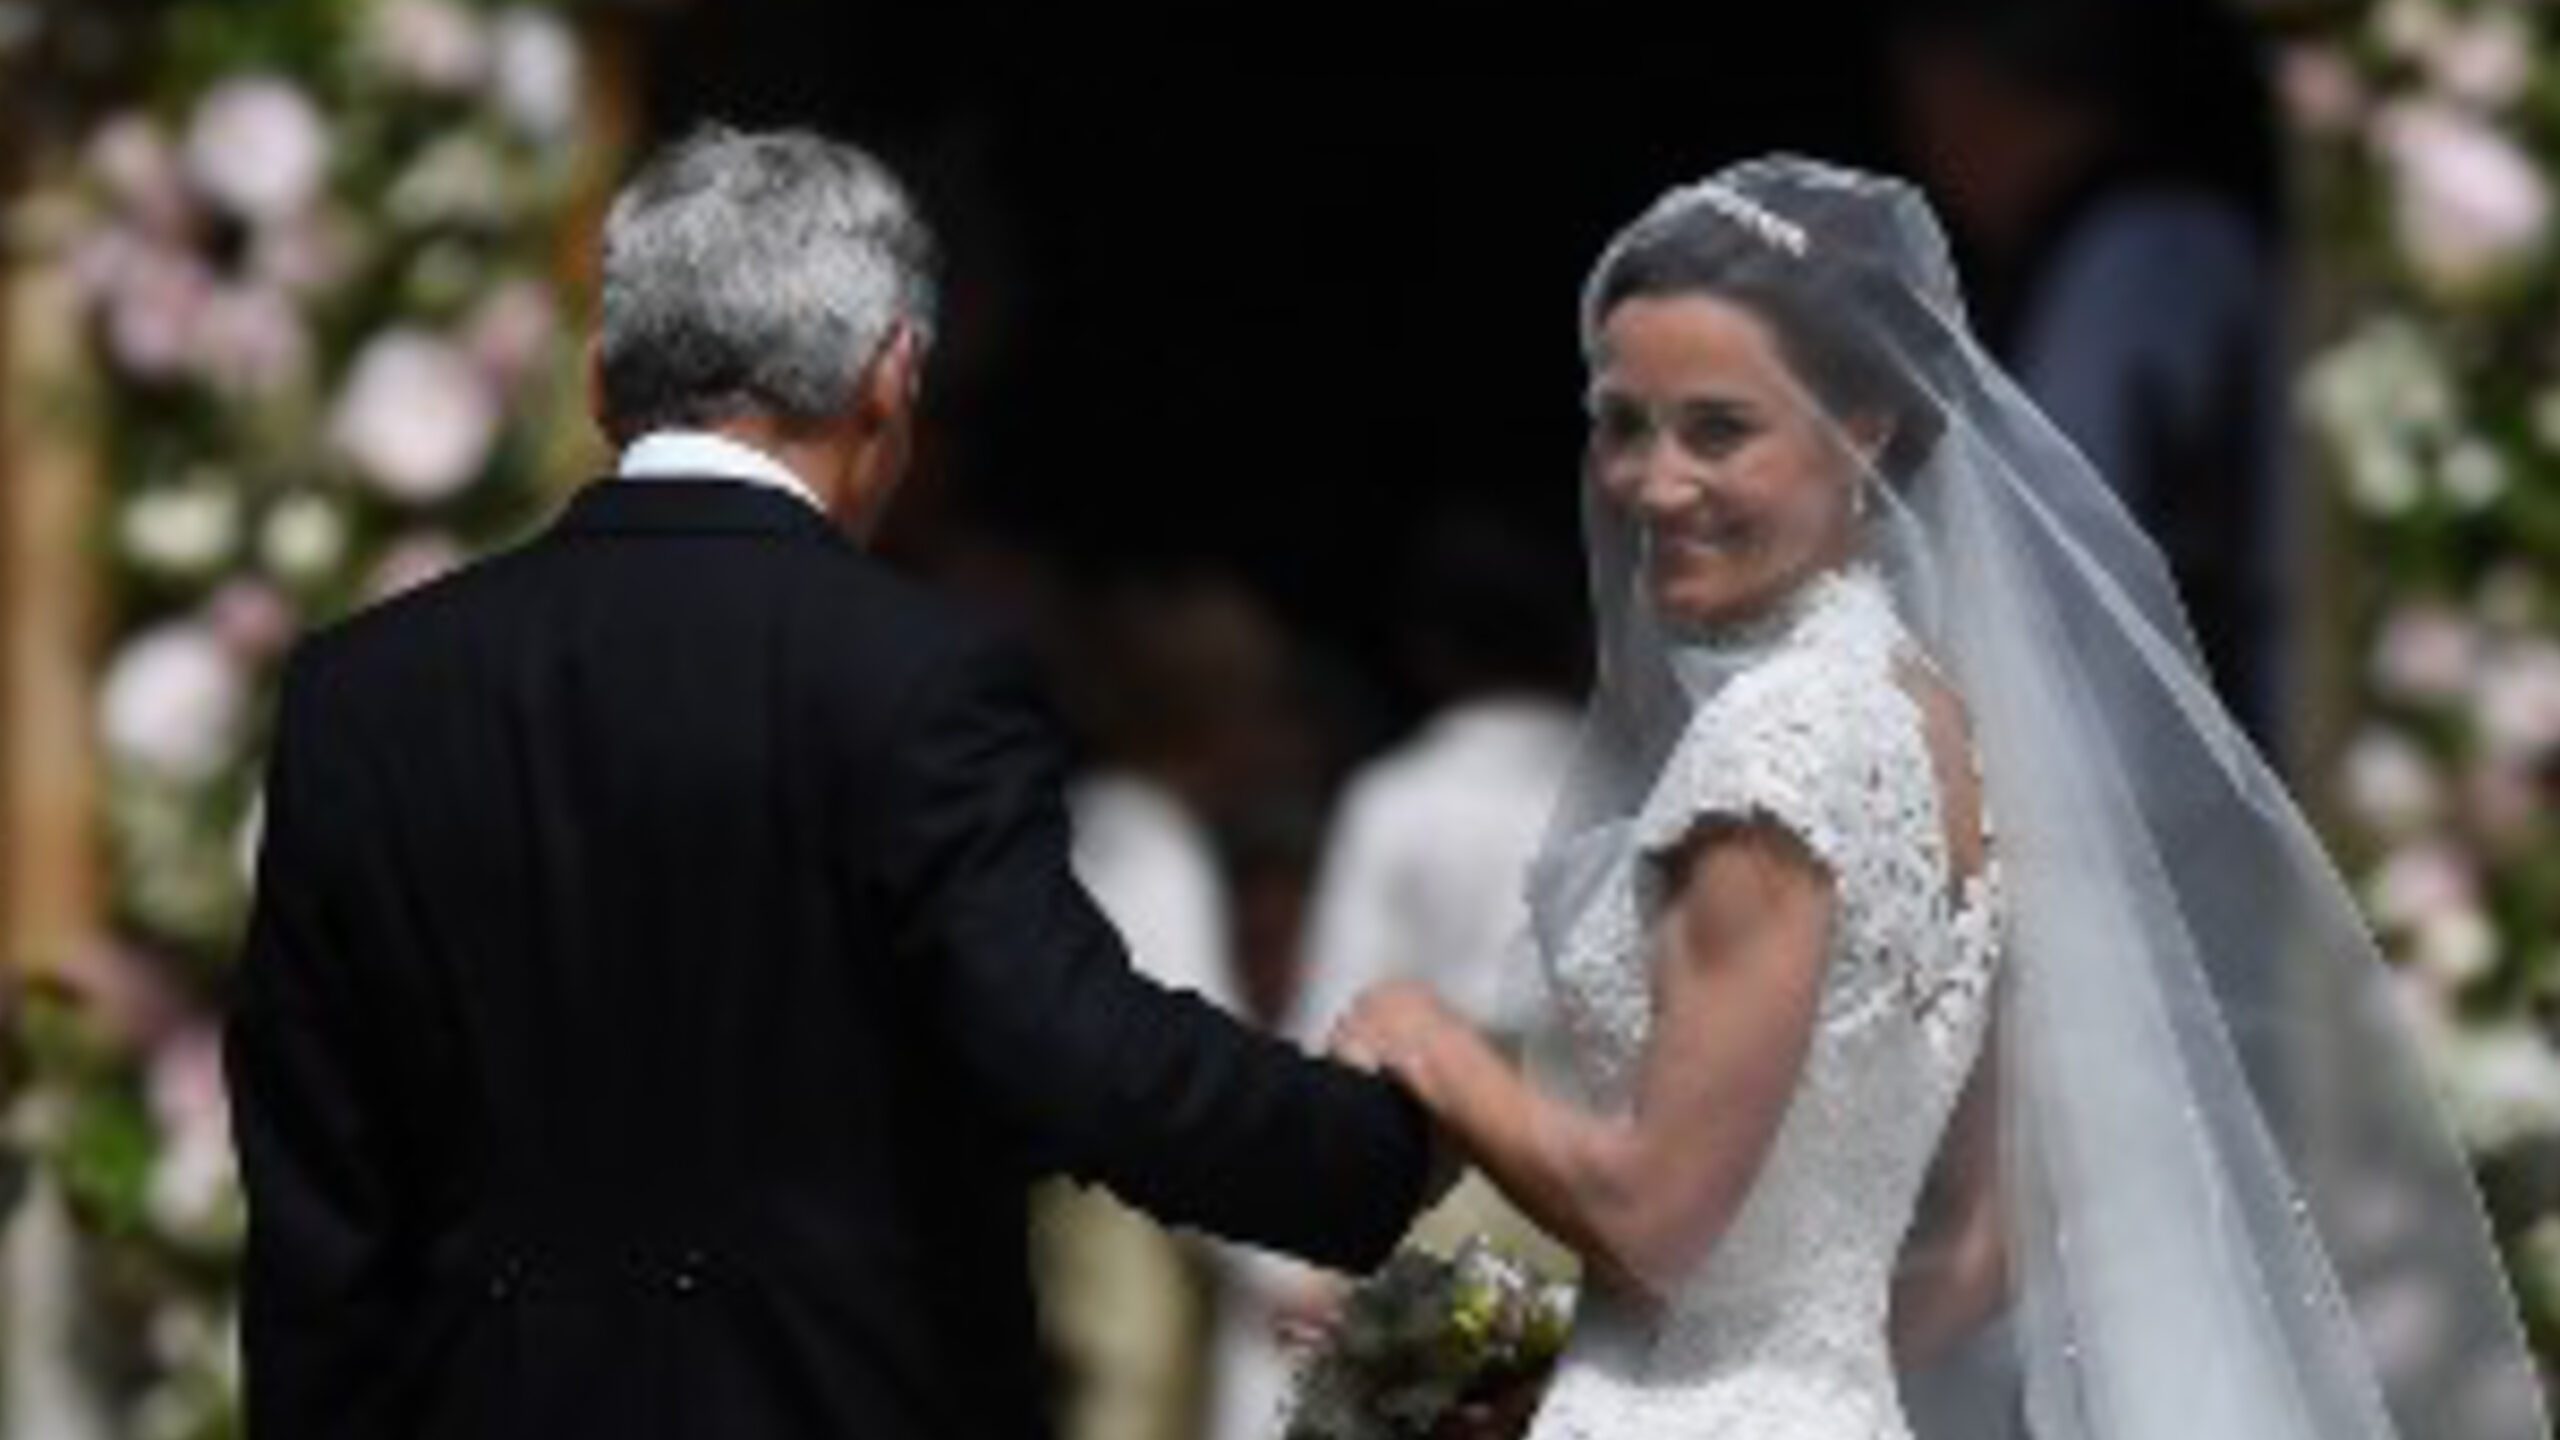 LOOK: Pippa Middleton’s wedding gown